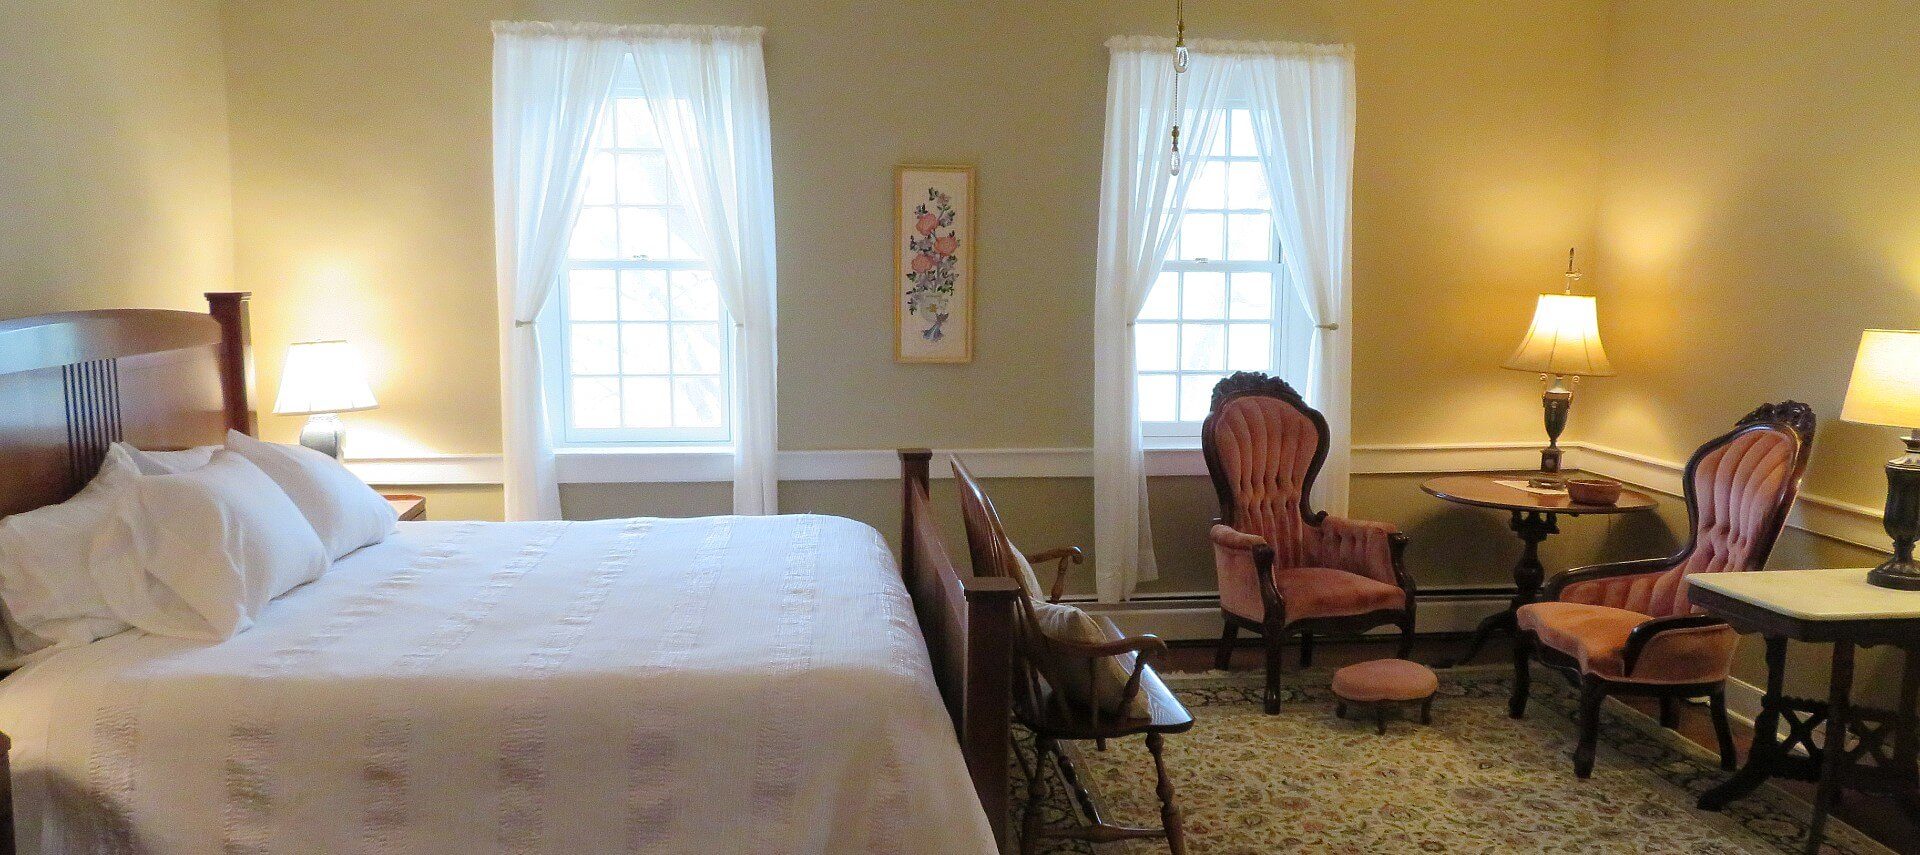 Guest room with king bed in white linens, sitting area and two bright large windows with white curtains